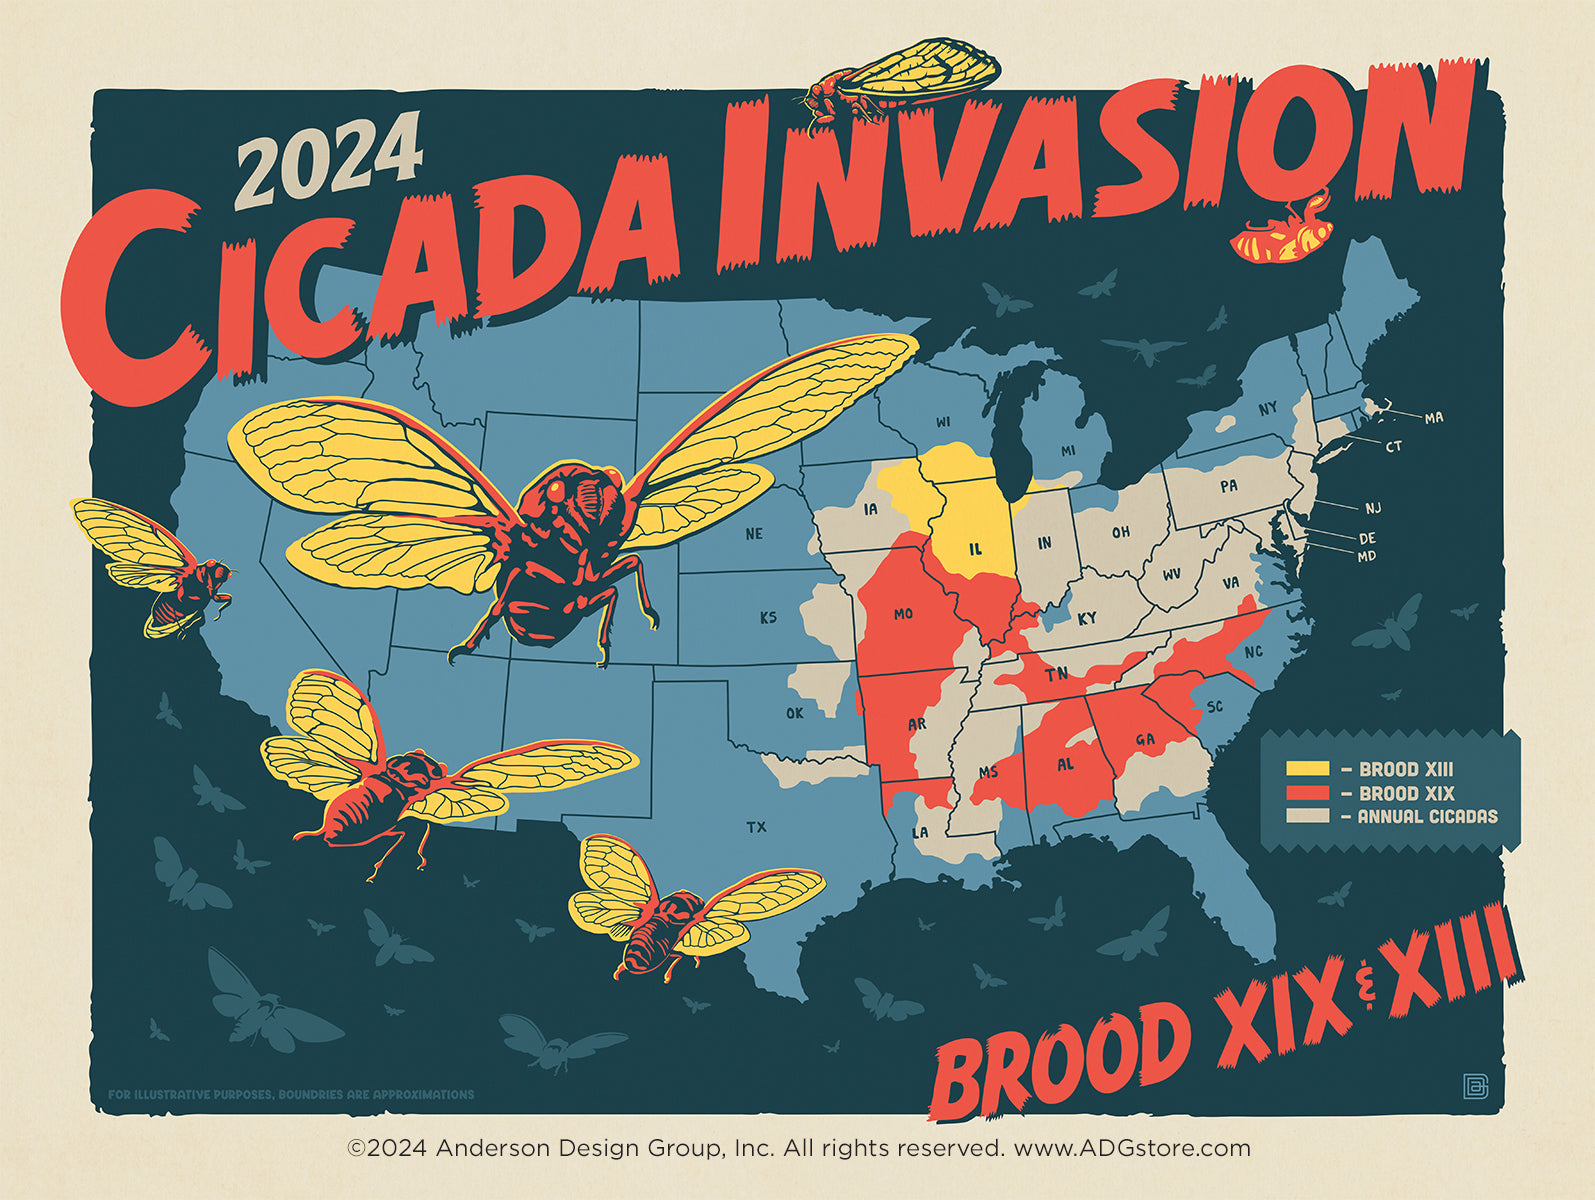 They are Coming… 2024 Cicada Invasion!